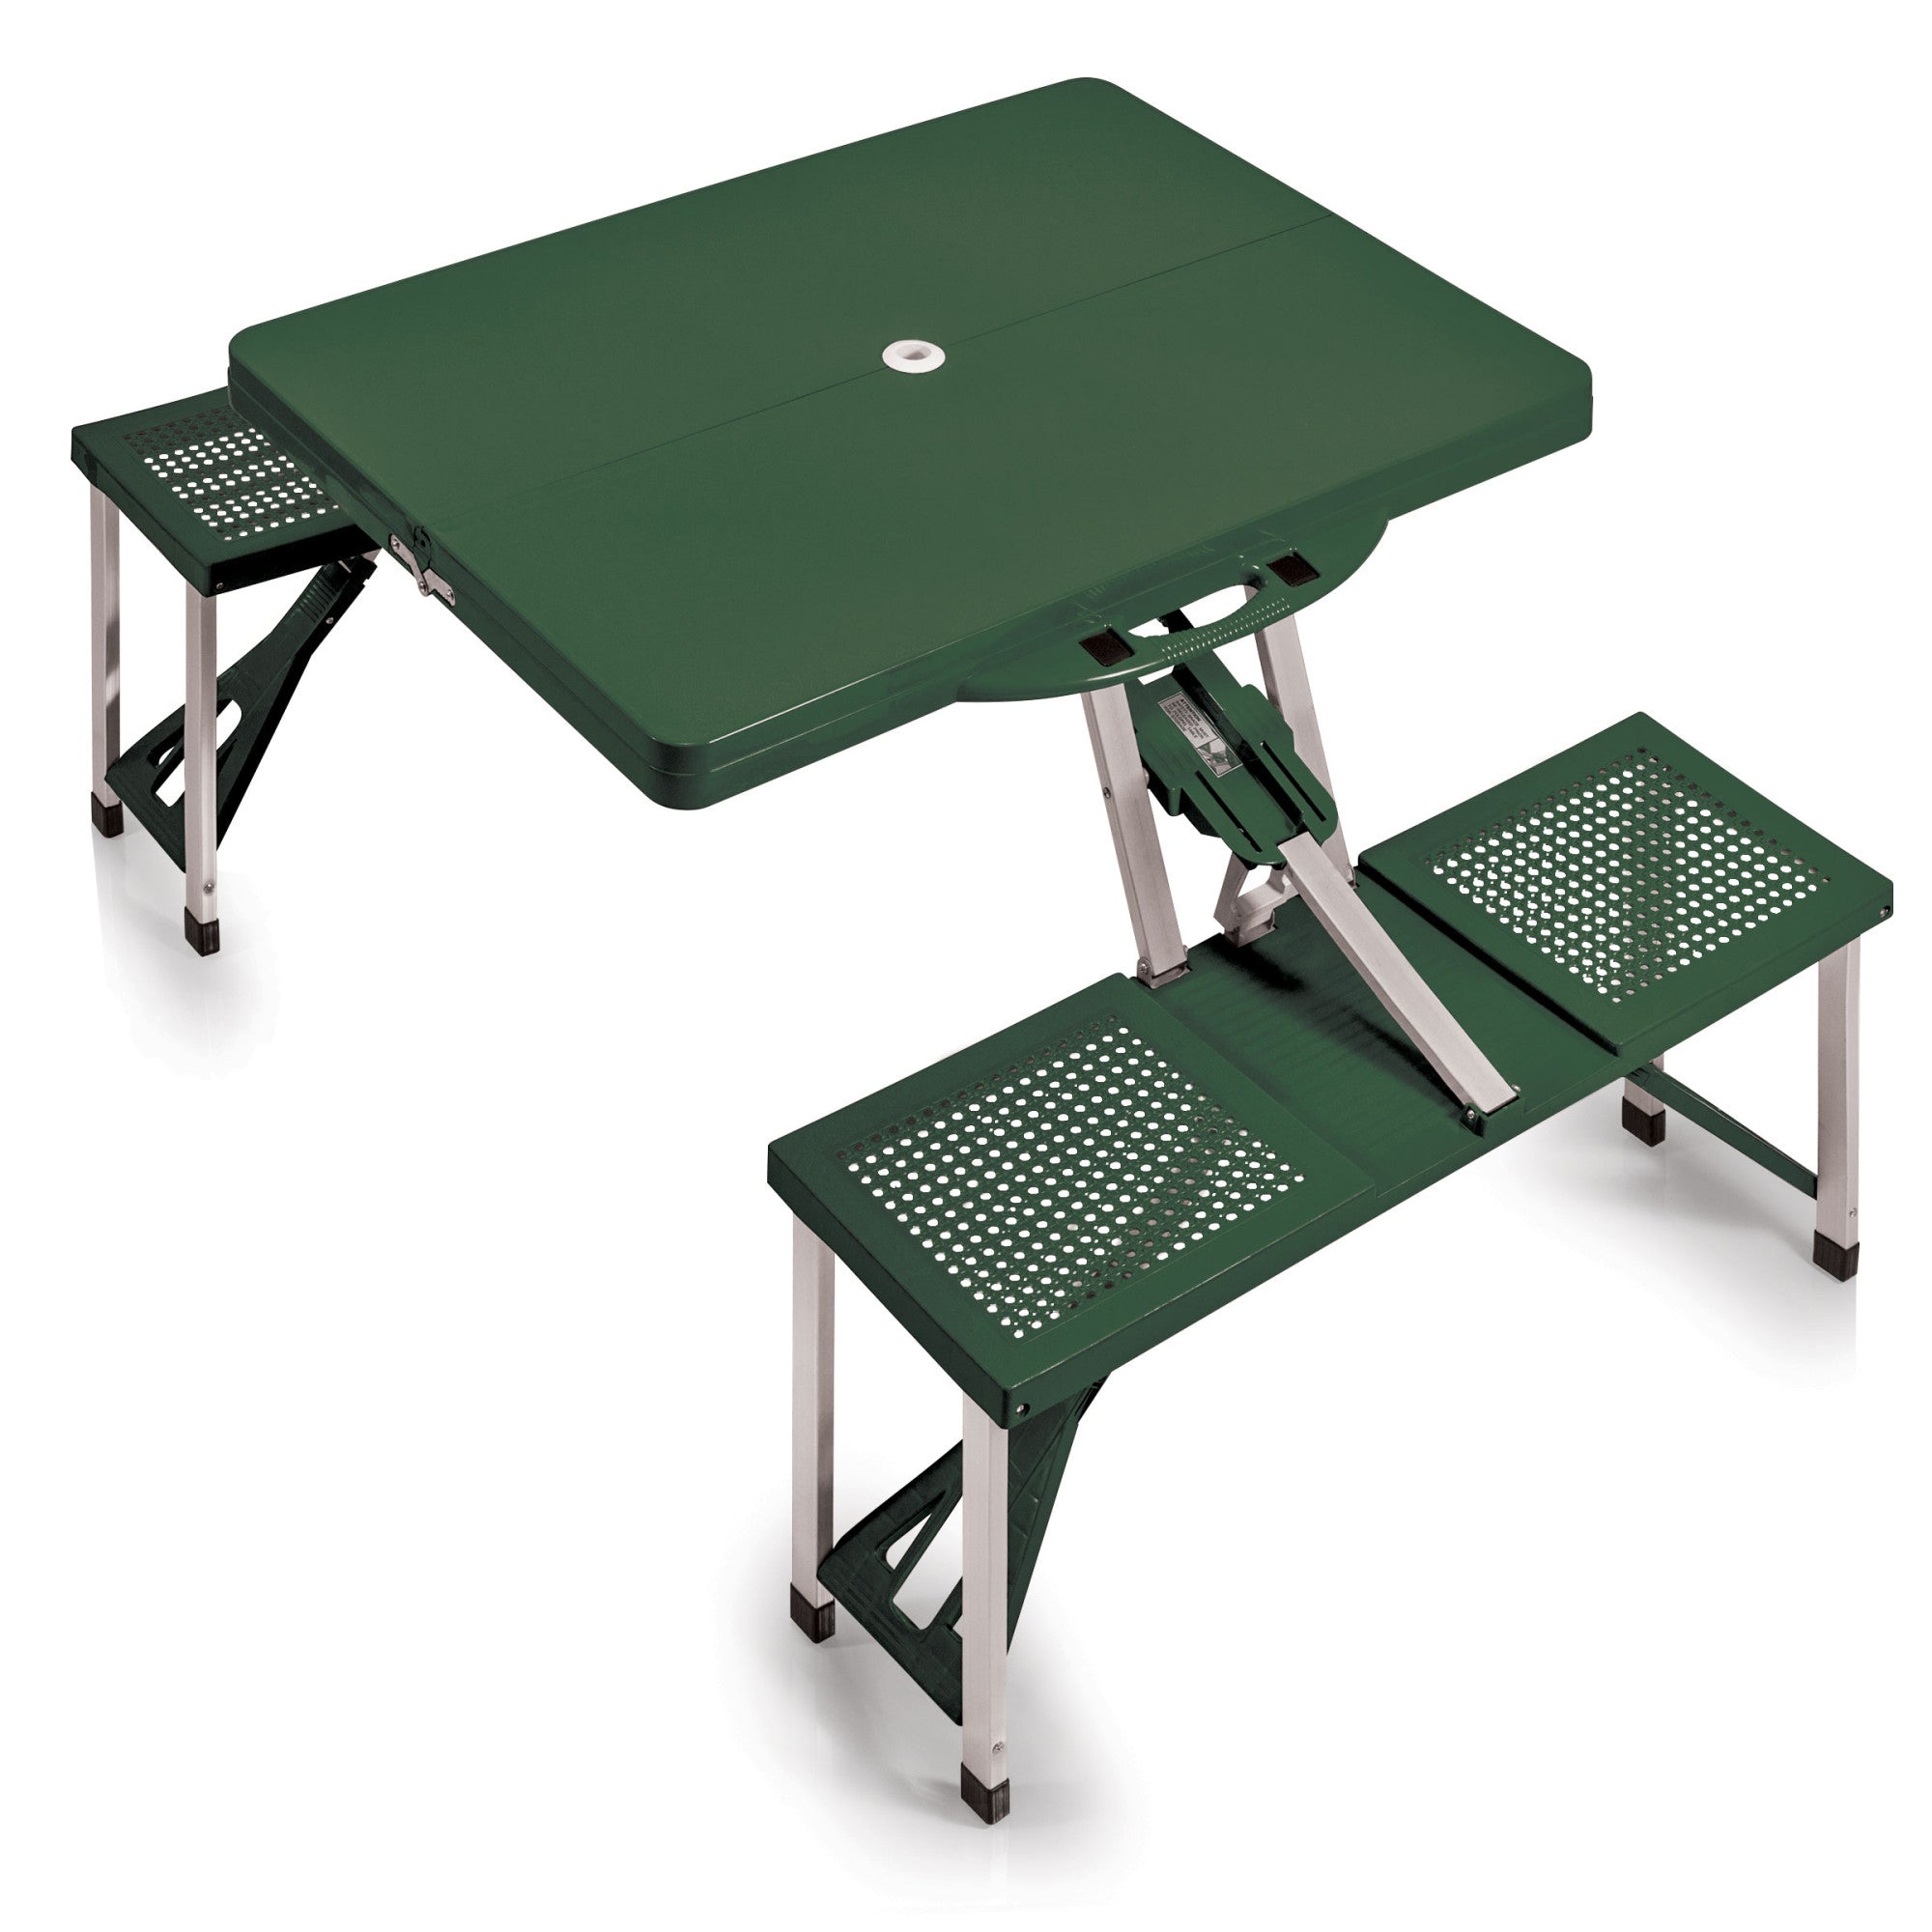 Folding Camping Table, Beach Table for Sand, Foldable Side Table, Foldable  Portable Camping Table, Folding Camp Table Camping Folding Table Small